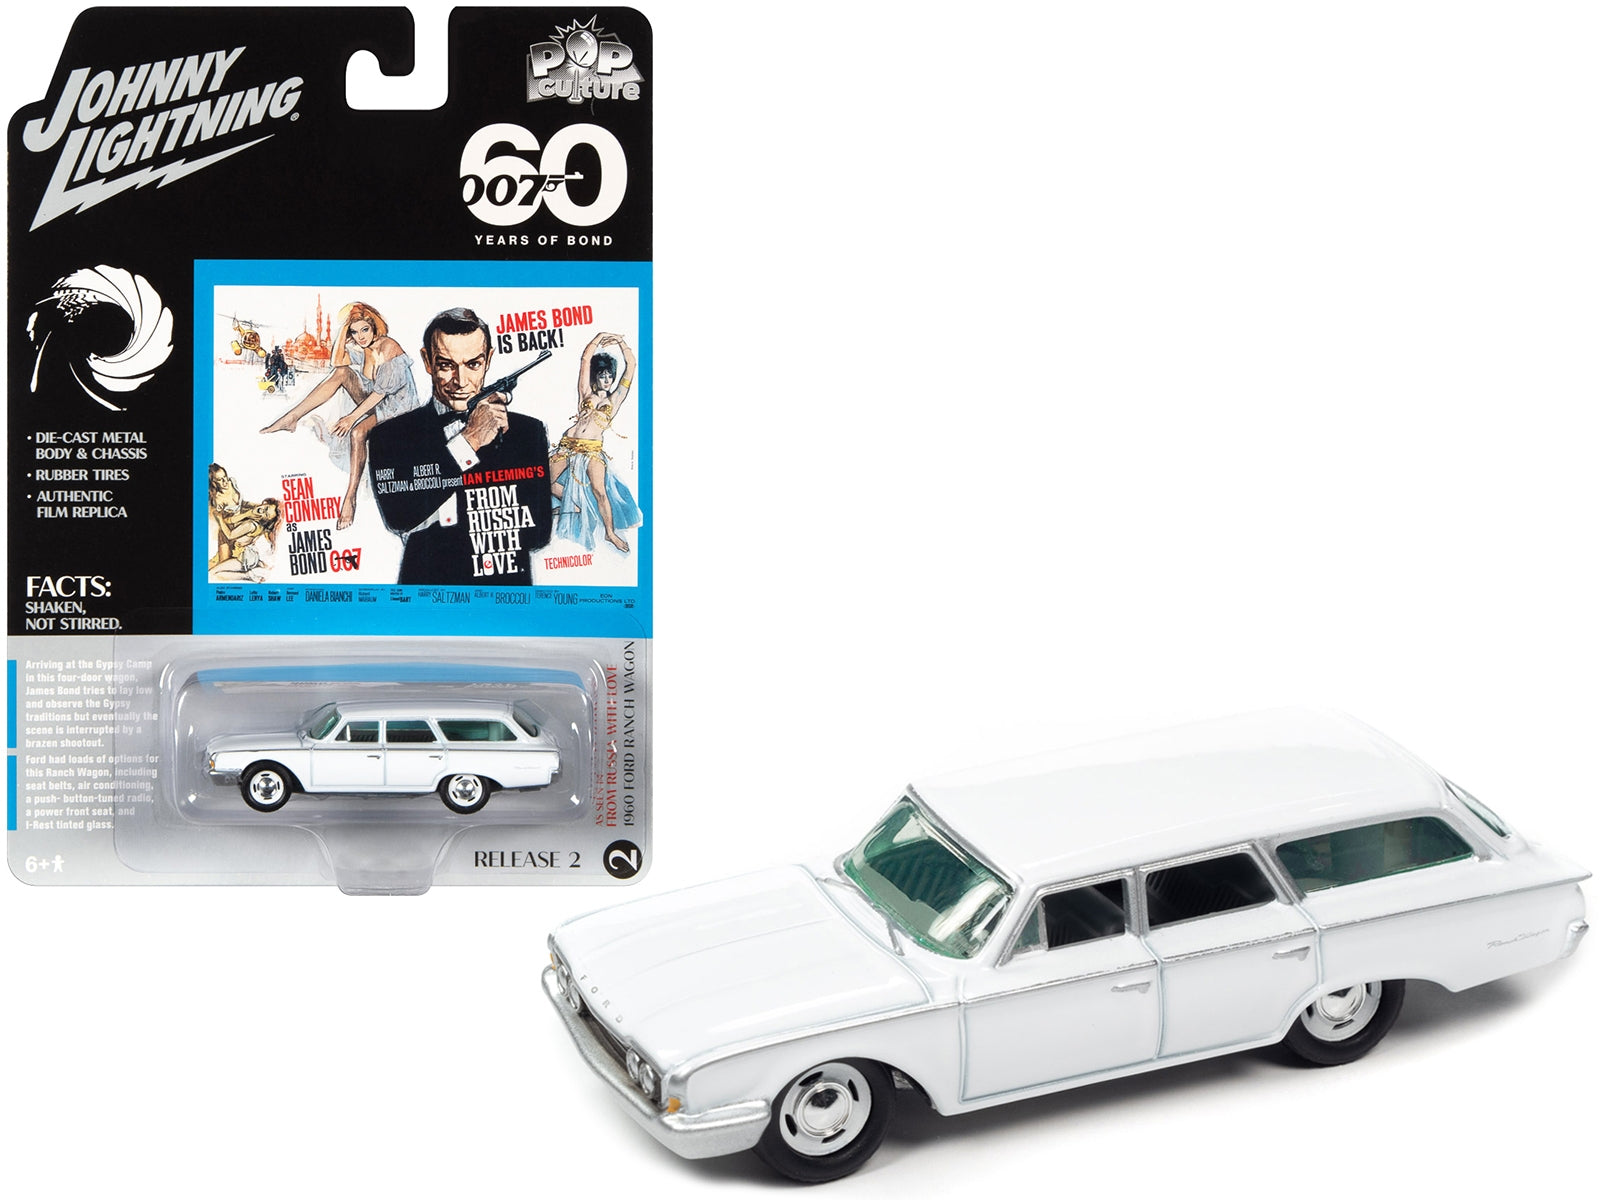 1960 Ford Ranch Wagon White 007 James Bond "From Russia With Love" (1963) Movie "Pop Culture" 2022 Release 2 1/64 Diecast Model Car by Johnny Lightning